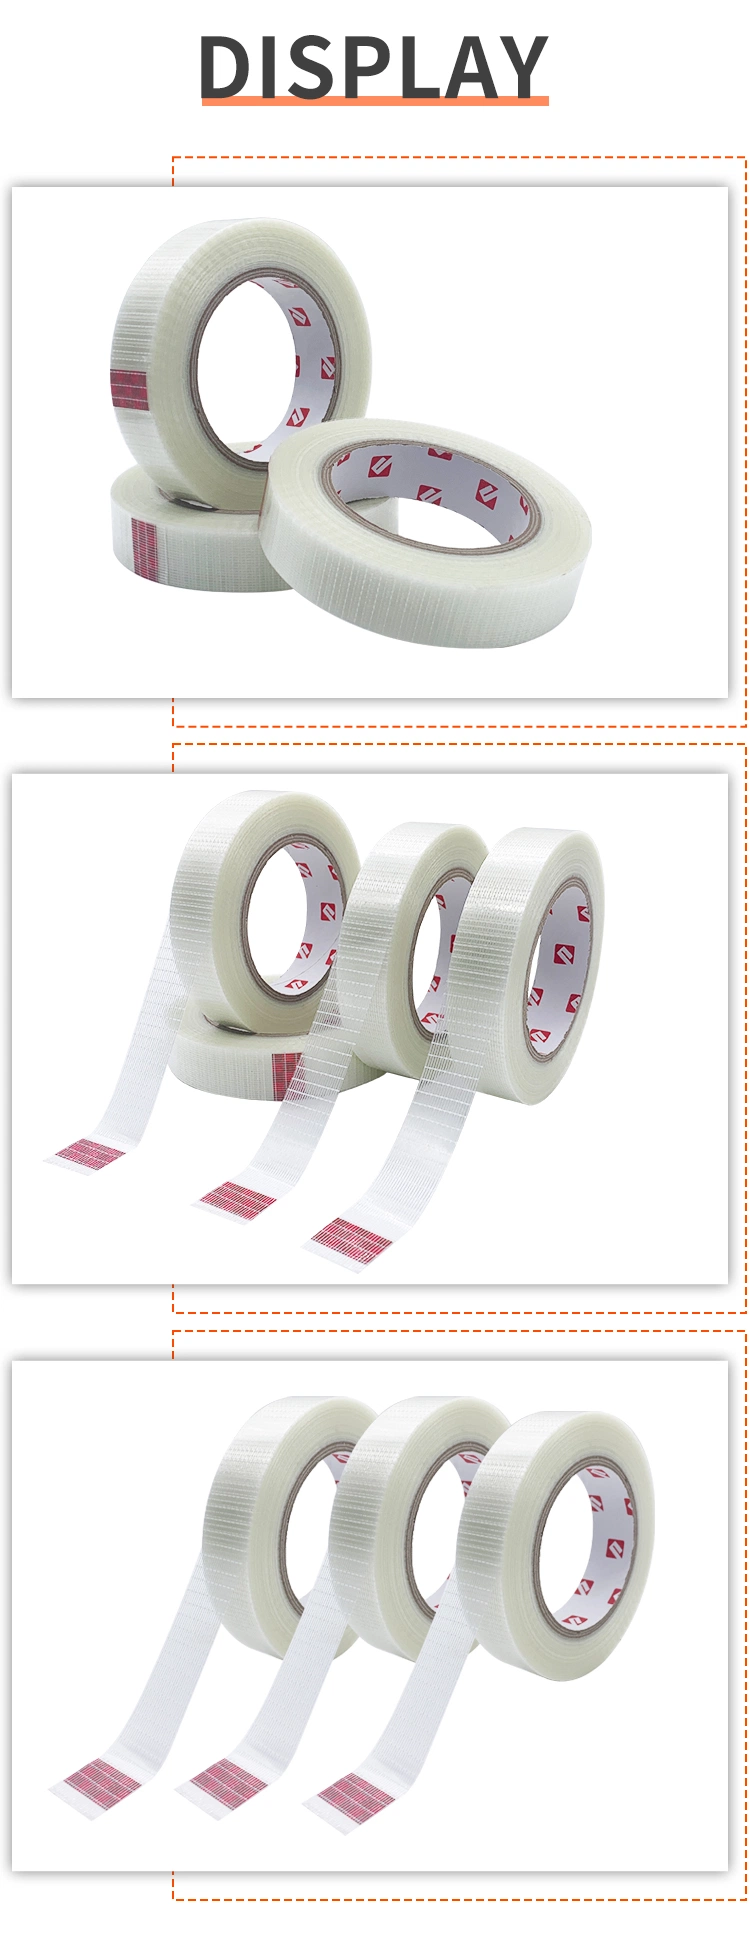 High Sticky Rubber Adhesive Filament Strapping Tape Reinforced Stripe Type Fiberglass Filament Tape for Binding Lithium Battery